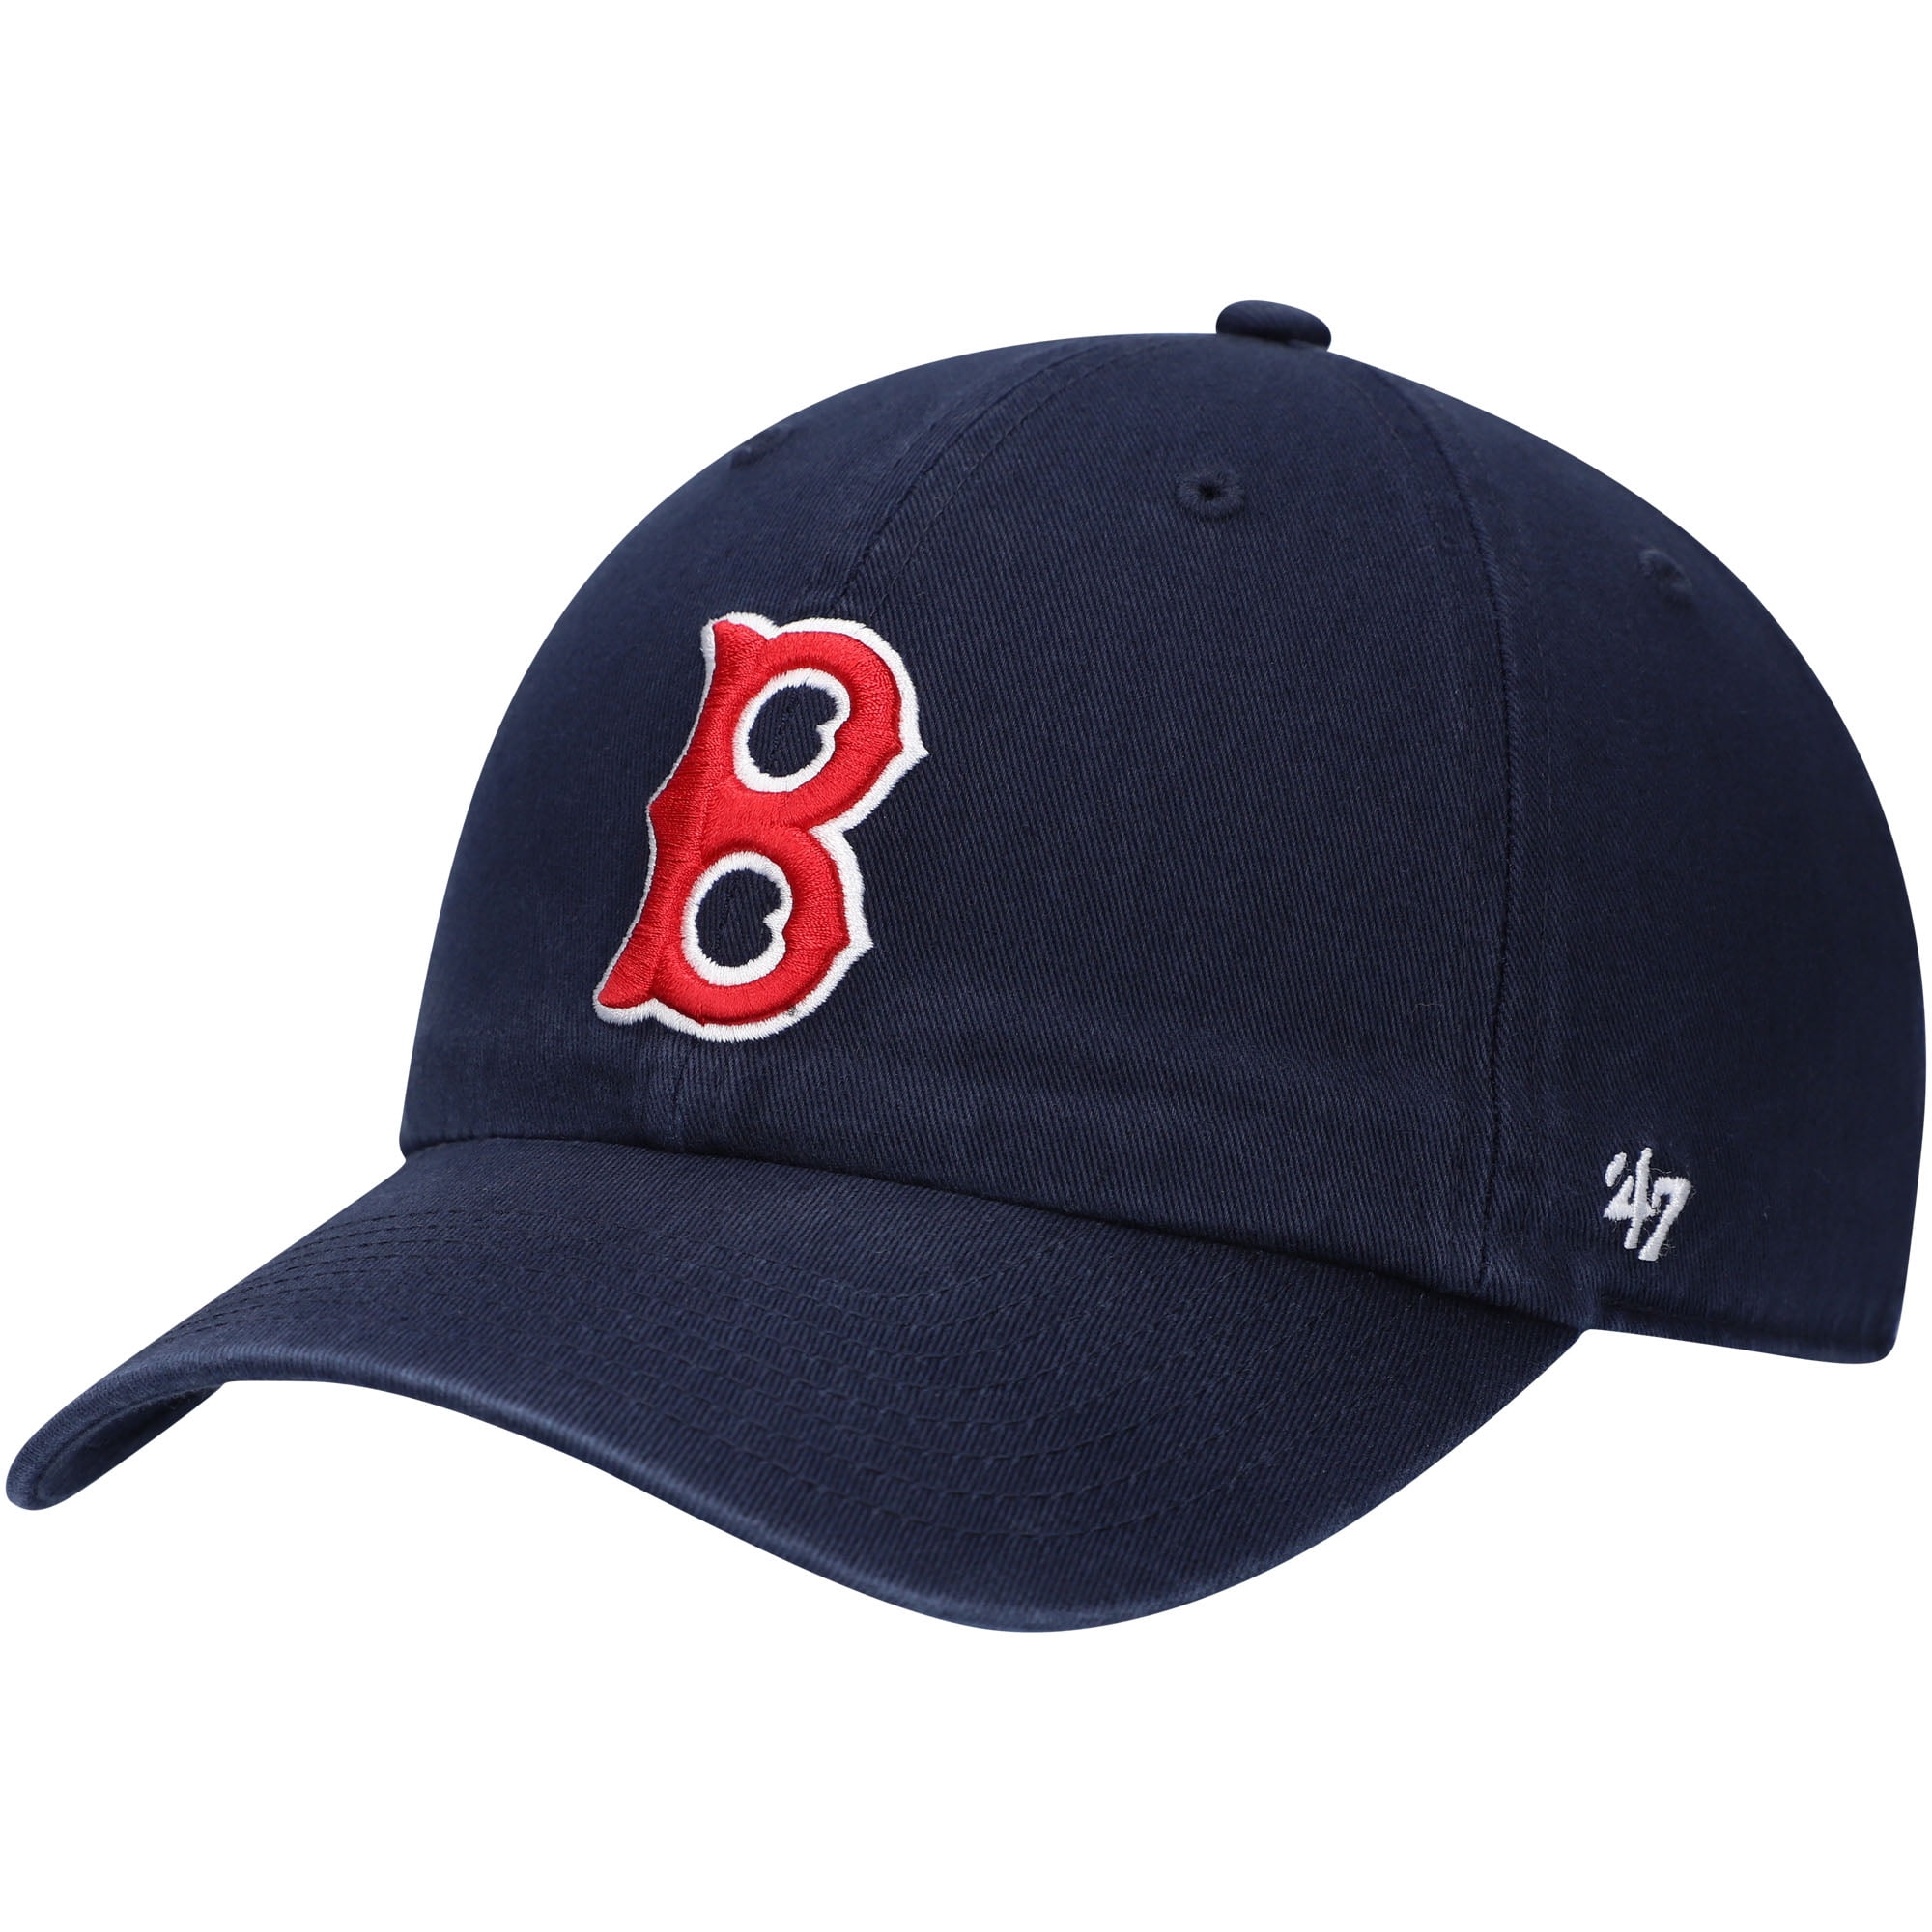 Boston Red Sox Cooperstown Collection, Throwback Red Sox Jerseys, Baseball  Tees, Hats